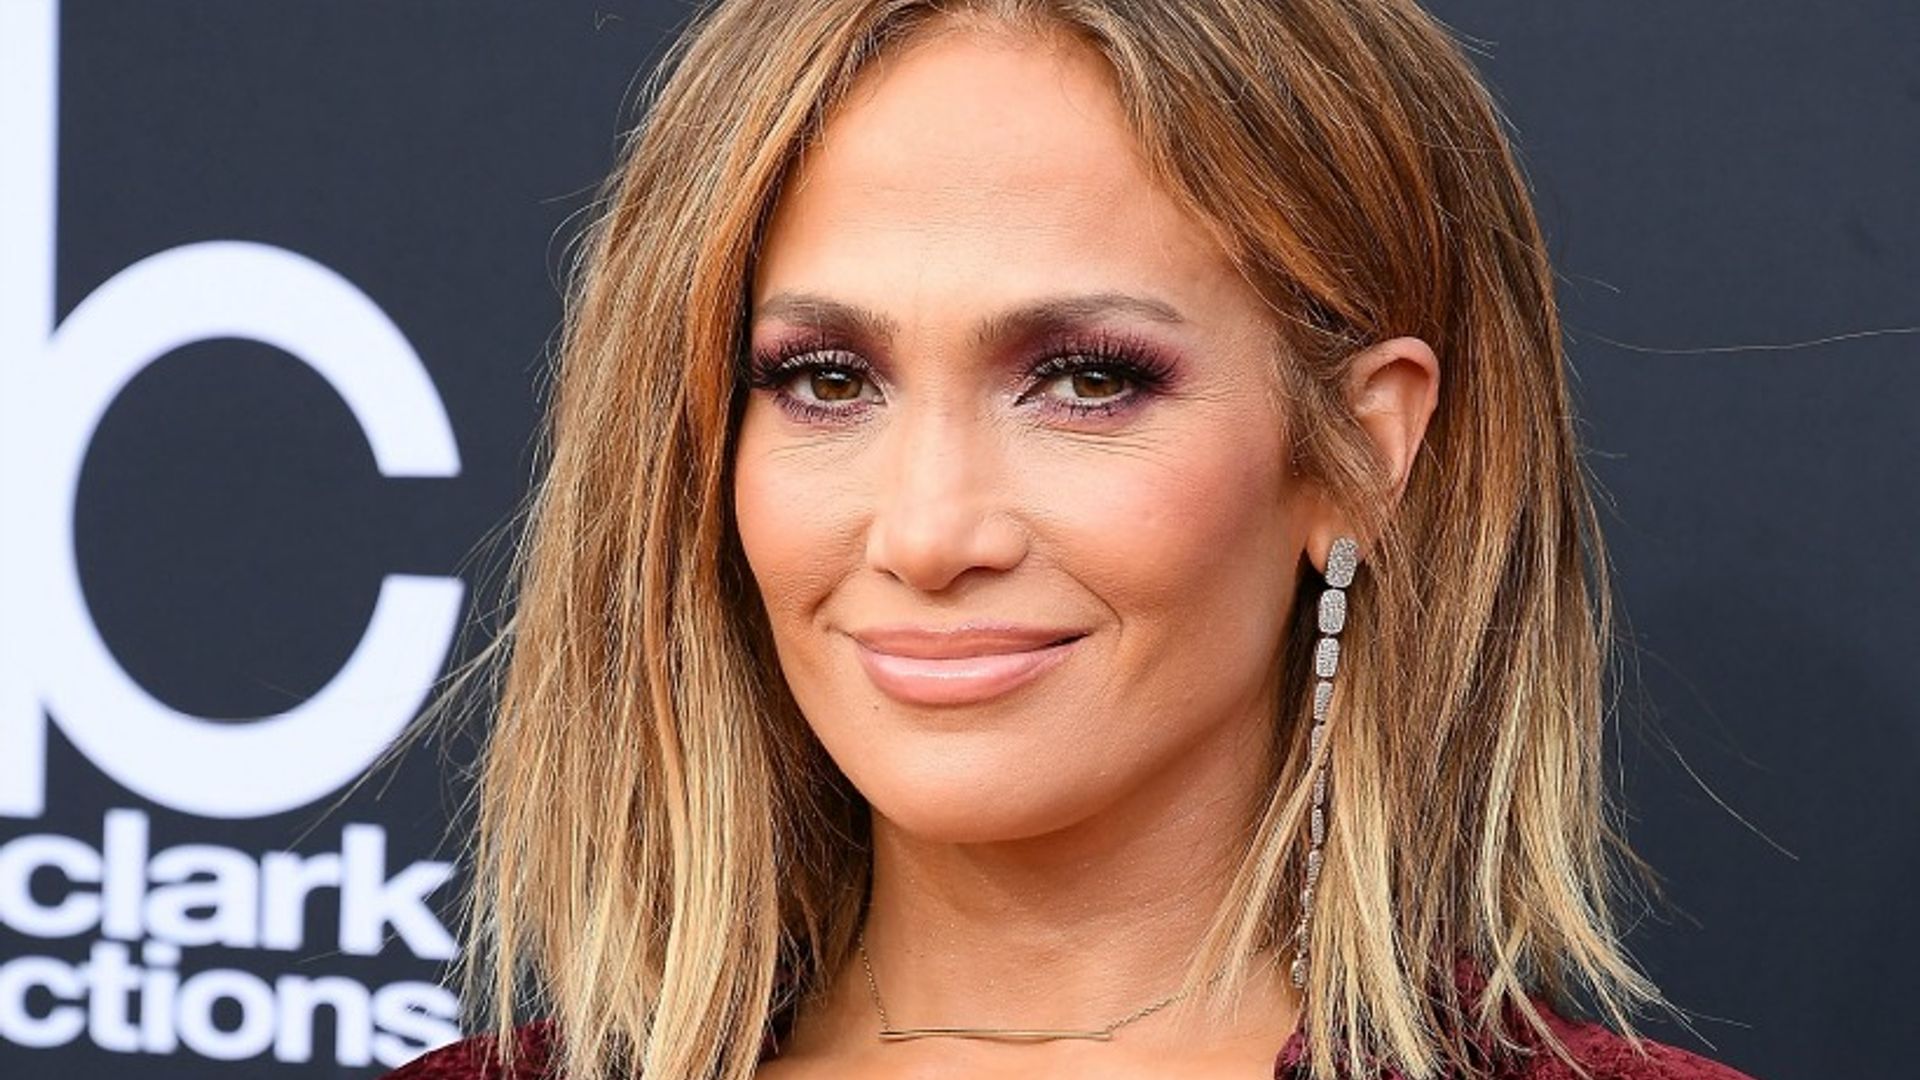 Jennifer Lopez just tore up a $100 bill for a manicure. Yes, really.